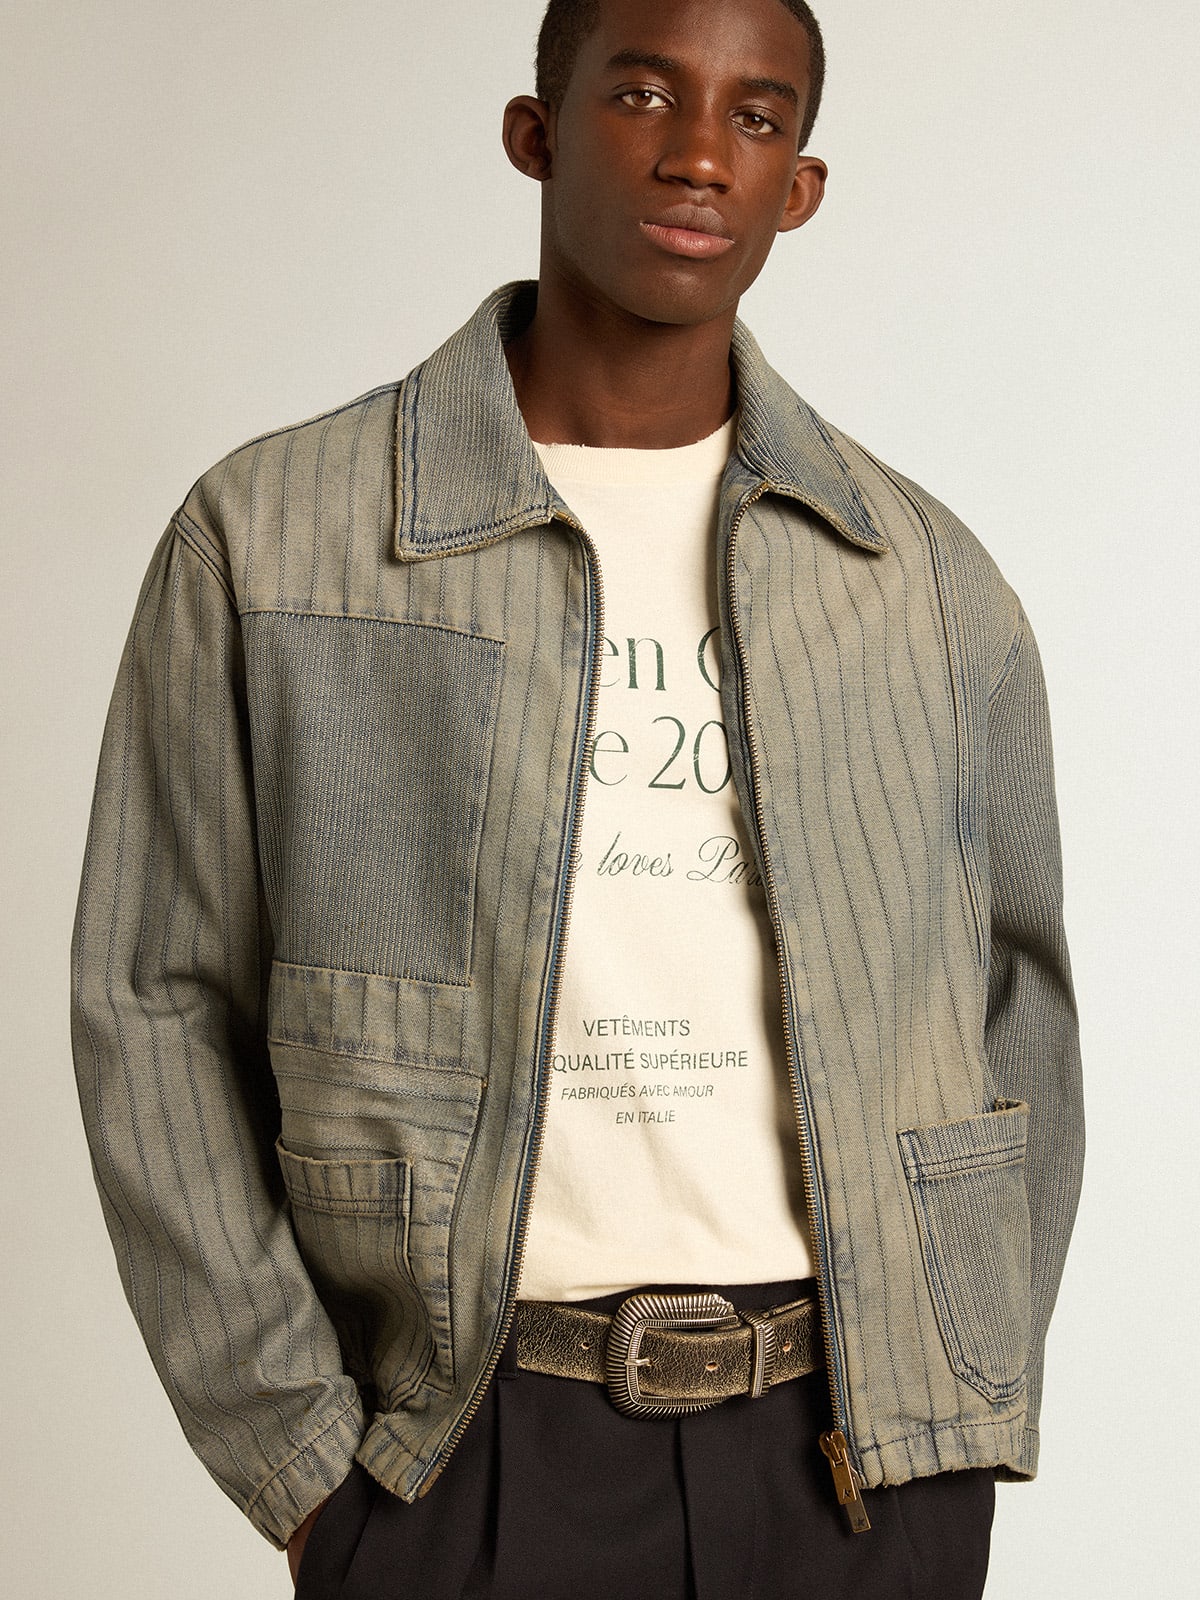 Golden Goose - Men’s denim jacket with stripes and patches on the front in 